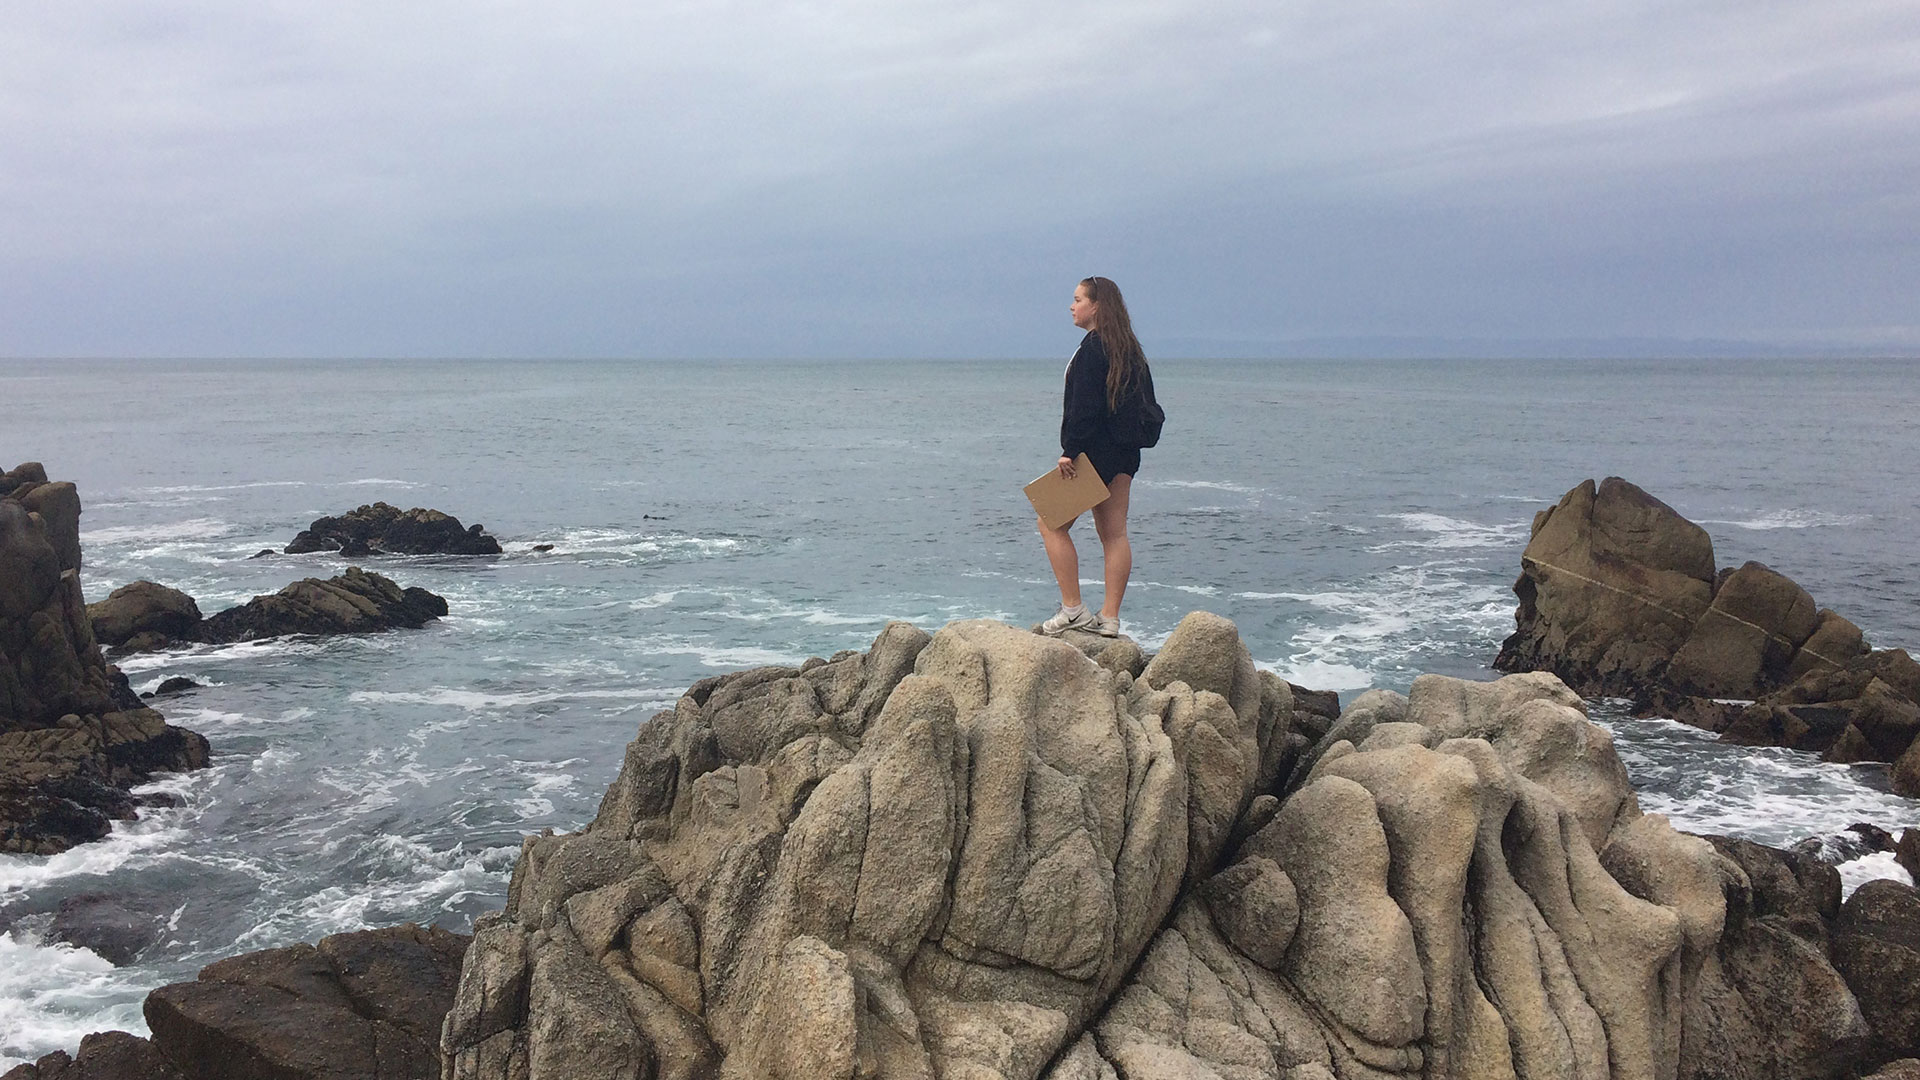 A woman stands on giant shoreline rocks looking out at the ocean and holding a clipboard